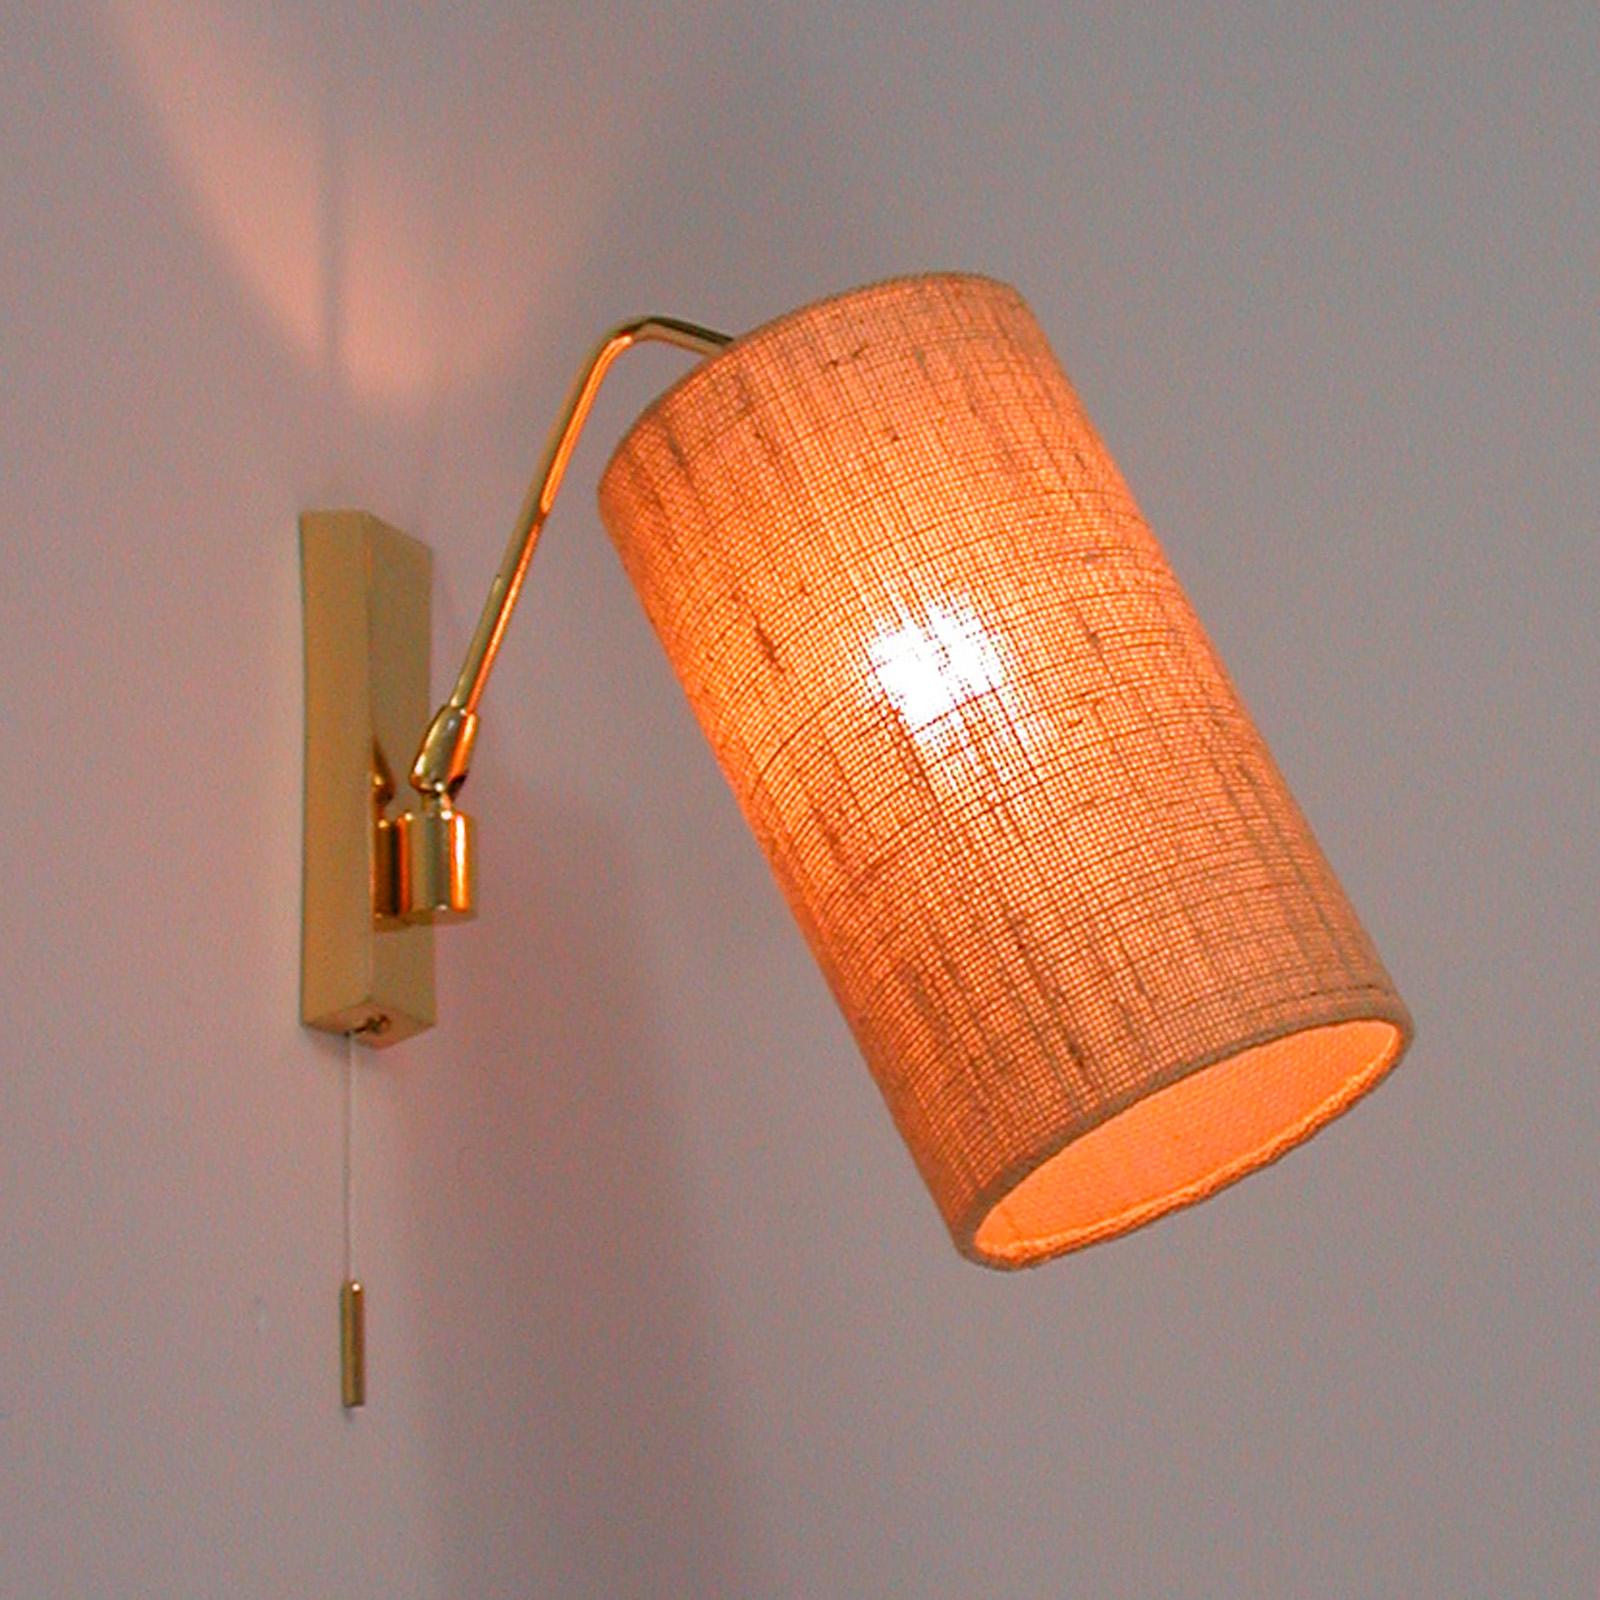 Midcentury Brass and Sisal Adjustable Sconce, Kalmar Attributed., Austria, 1960s For Sale 2